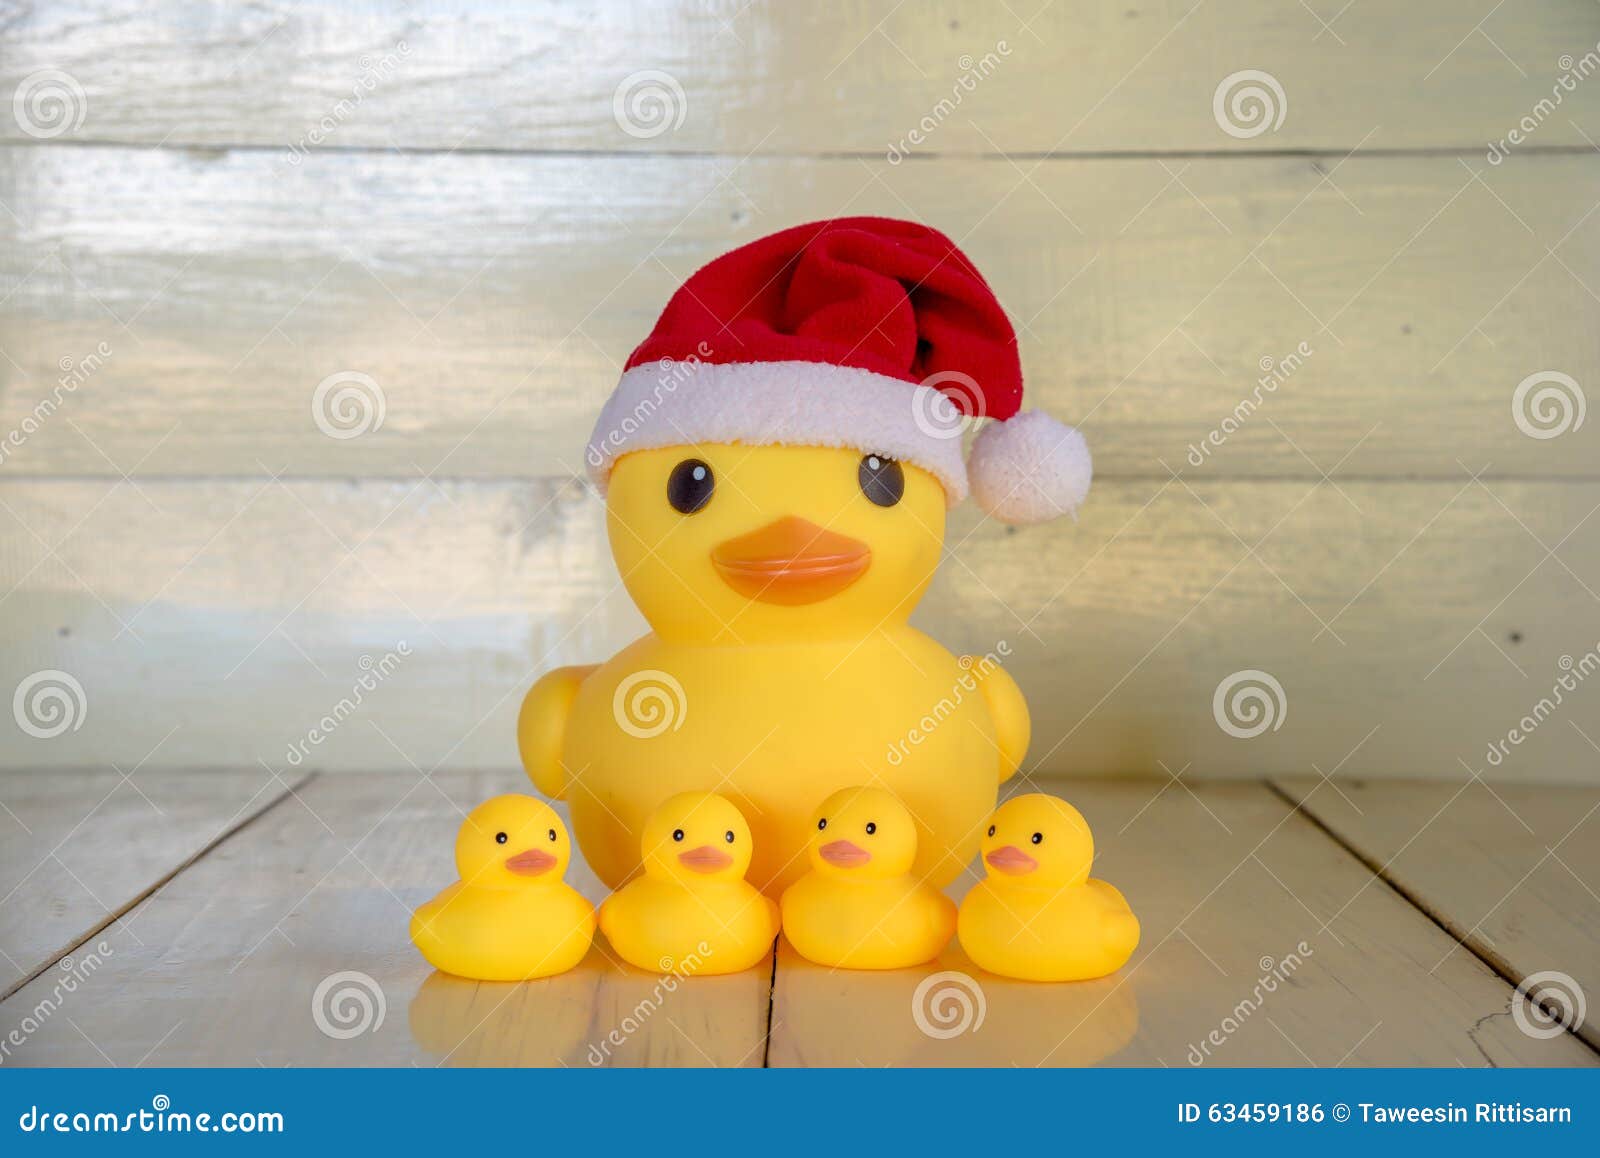 https://thumbs.dreamstime.com/z/christmas-concept-rubber-yellow-duck-wear-santa-clause-hat-gift-boxes-set-as-decoration-white-color-wood-board-63459186.jpg